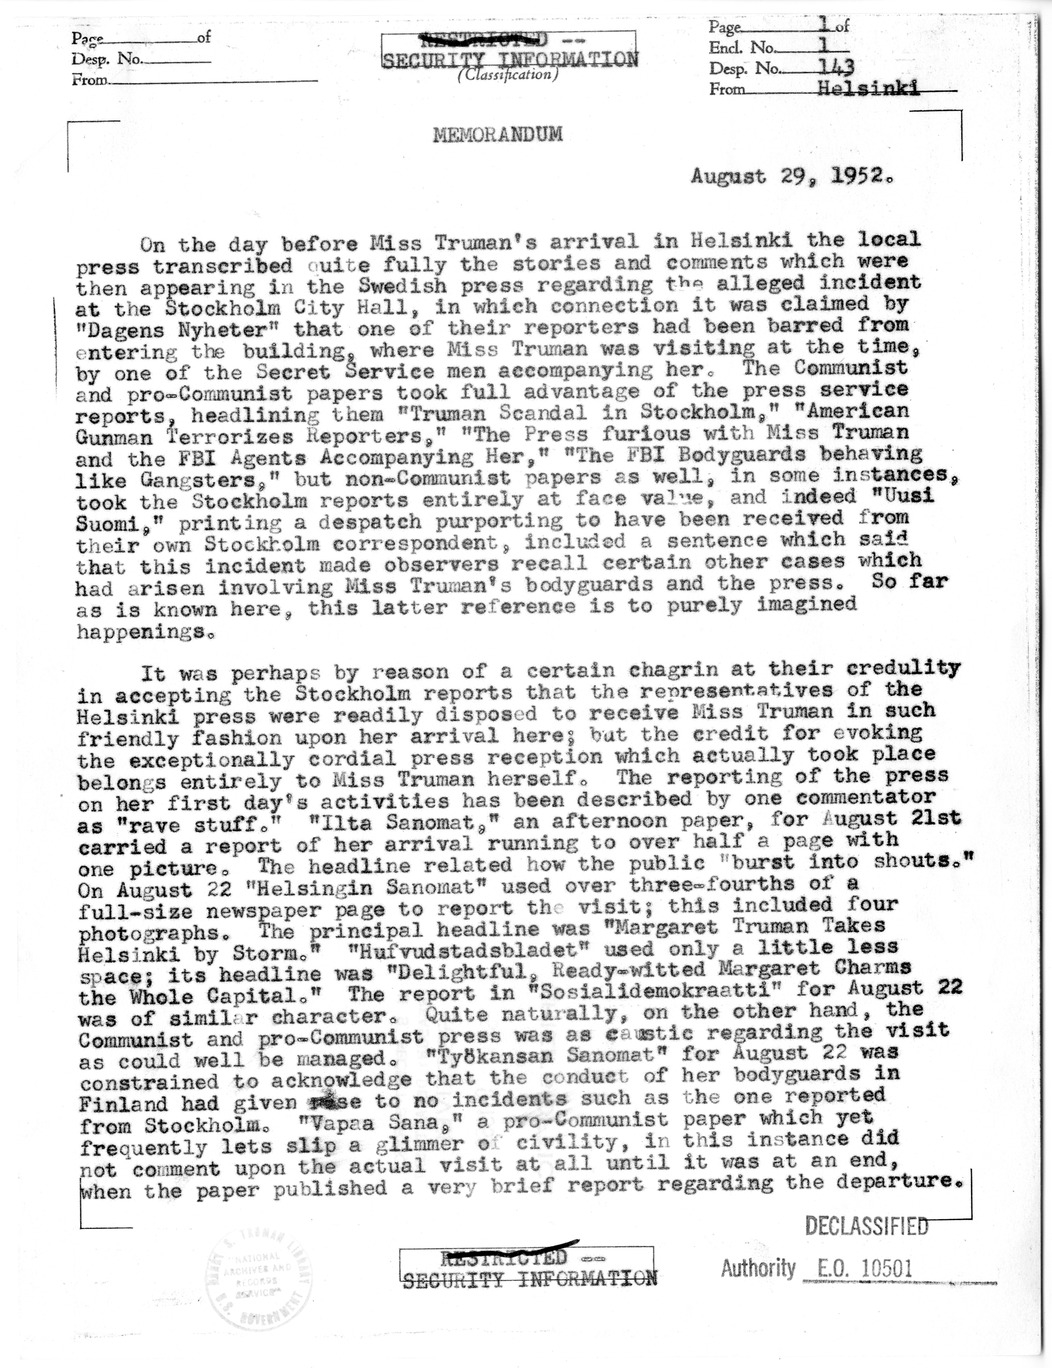 Foreign Service Despatch from H. Bartlett Wells to Department of State , with Attached Memorandum